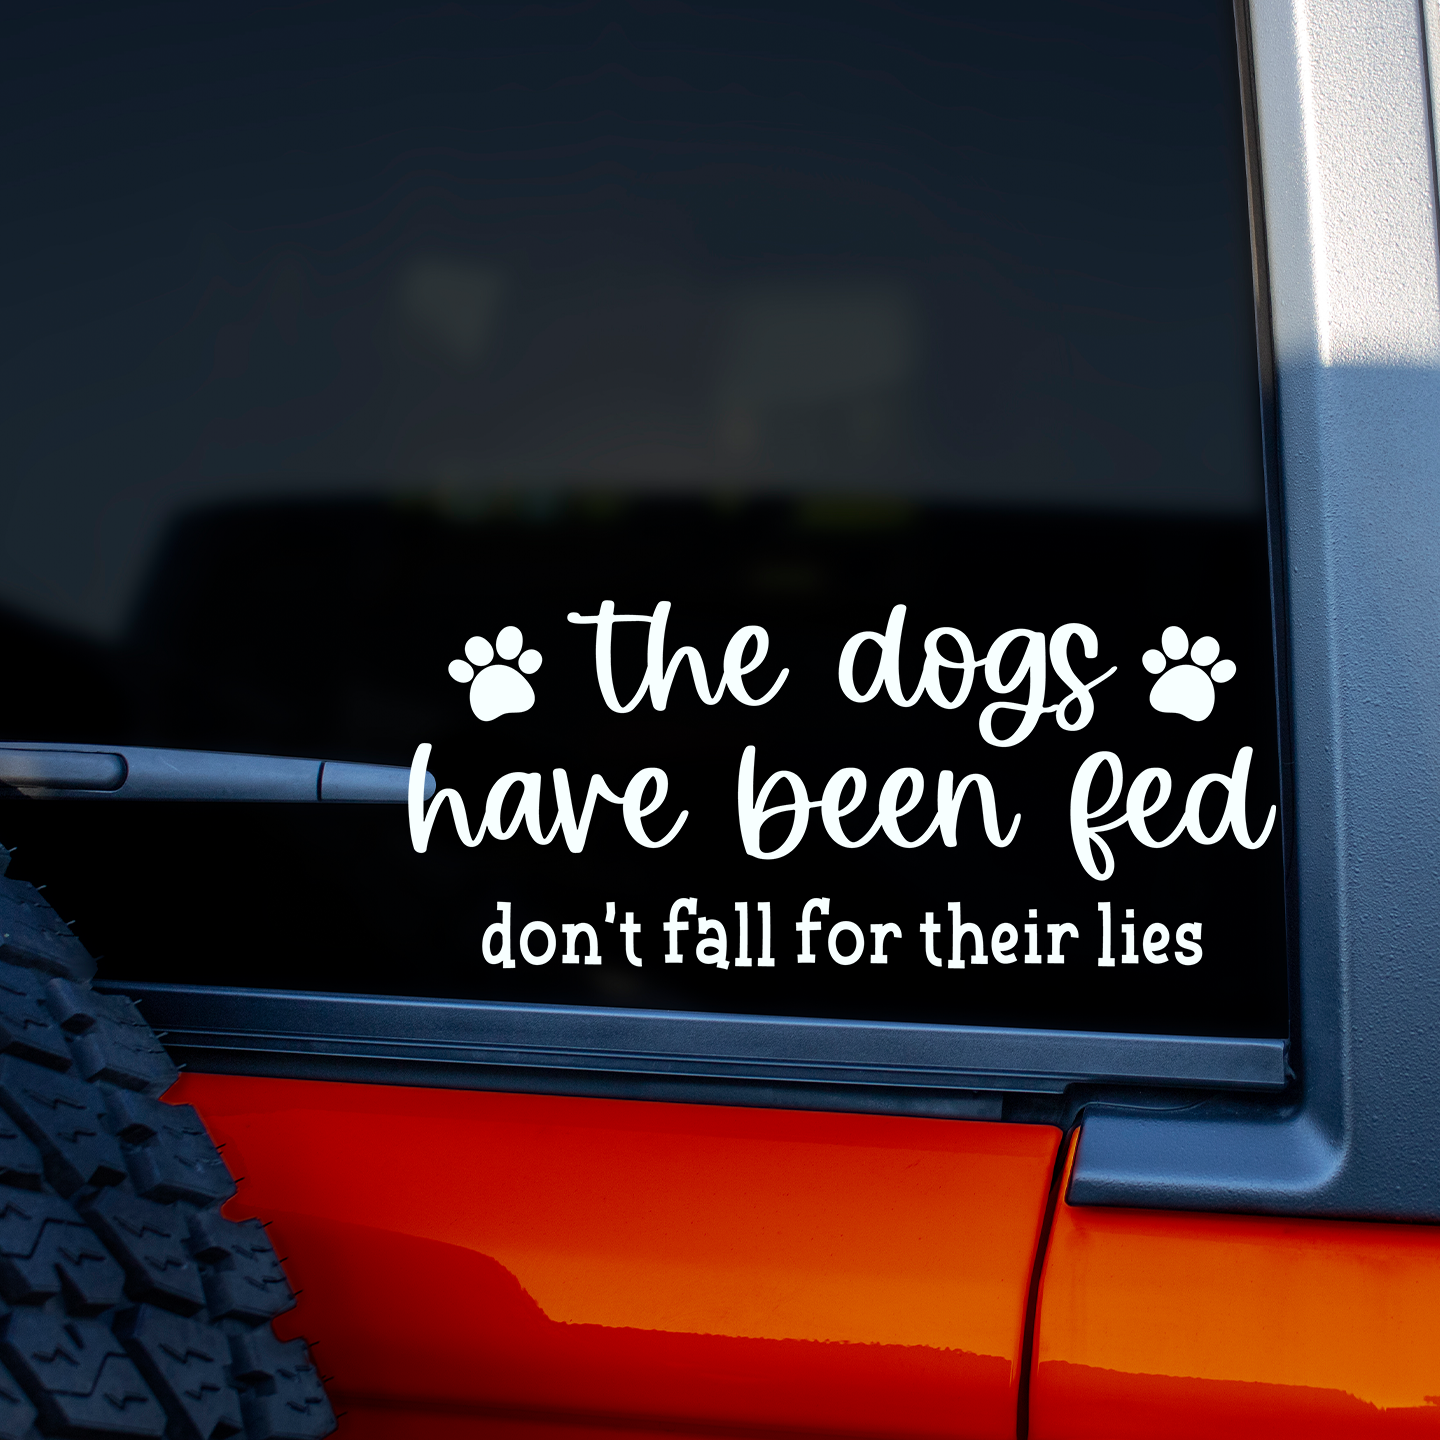 Dogs Have Been Fed Don't Fall For Their Lies Sticker